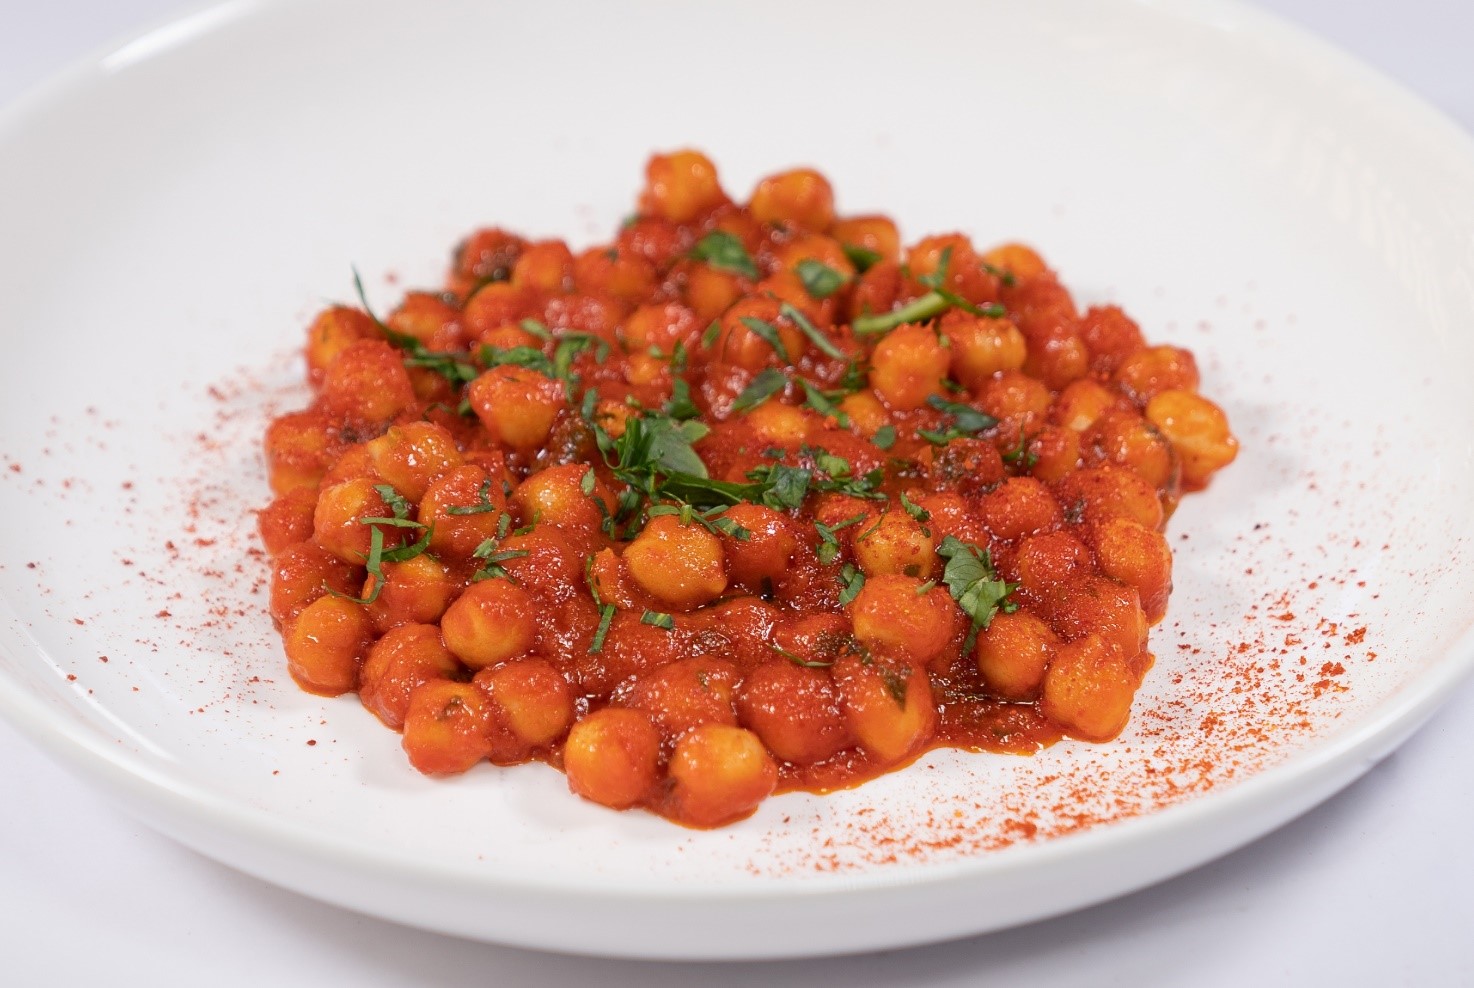 Spanish chickpeas with spicy paprika tomato sauce